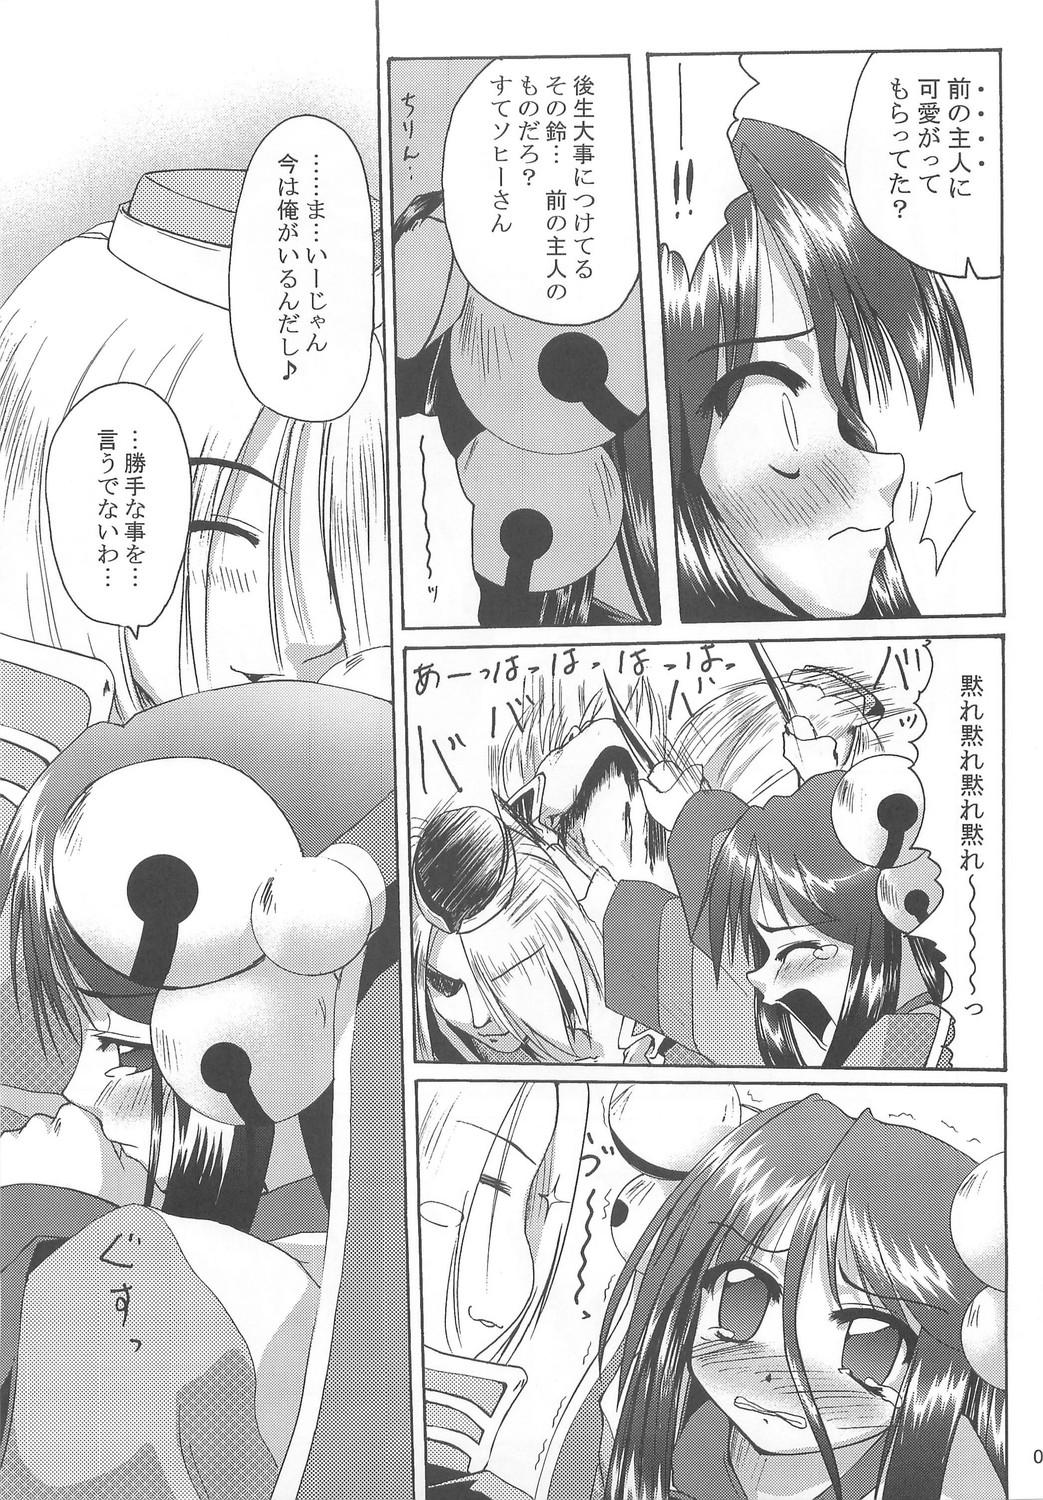 Breasts Full style #1 - Ragnarok online 8teen - Page 10